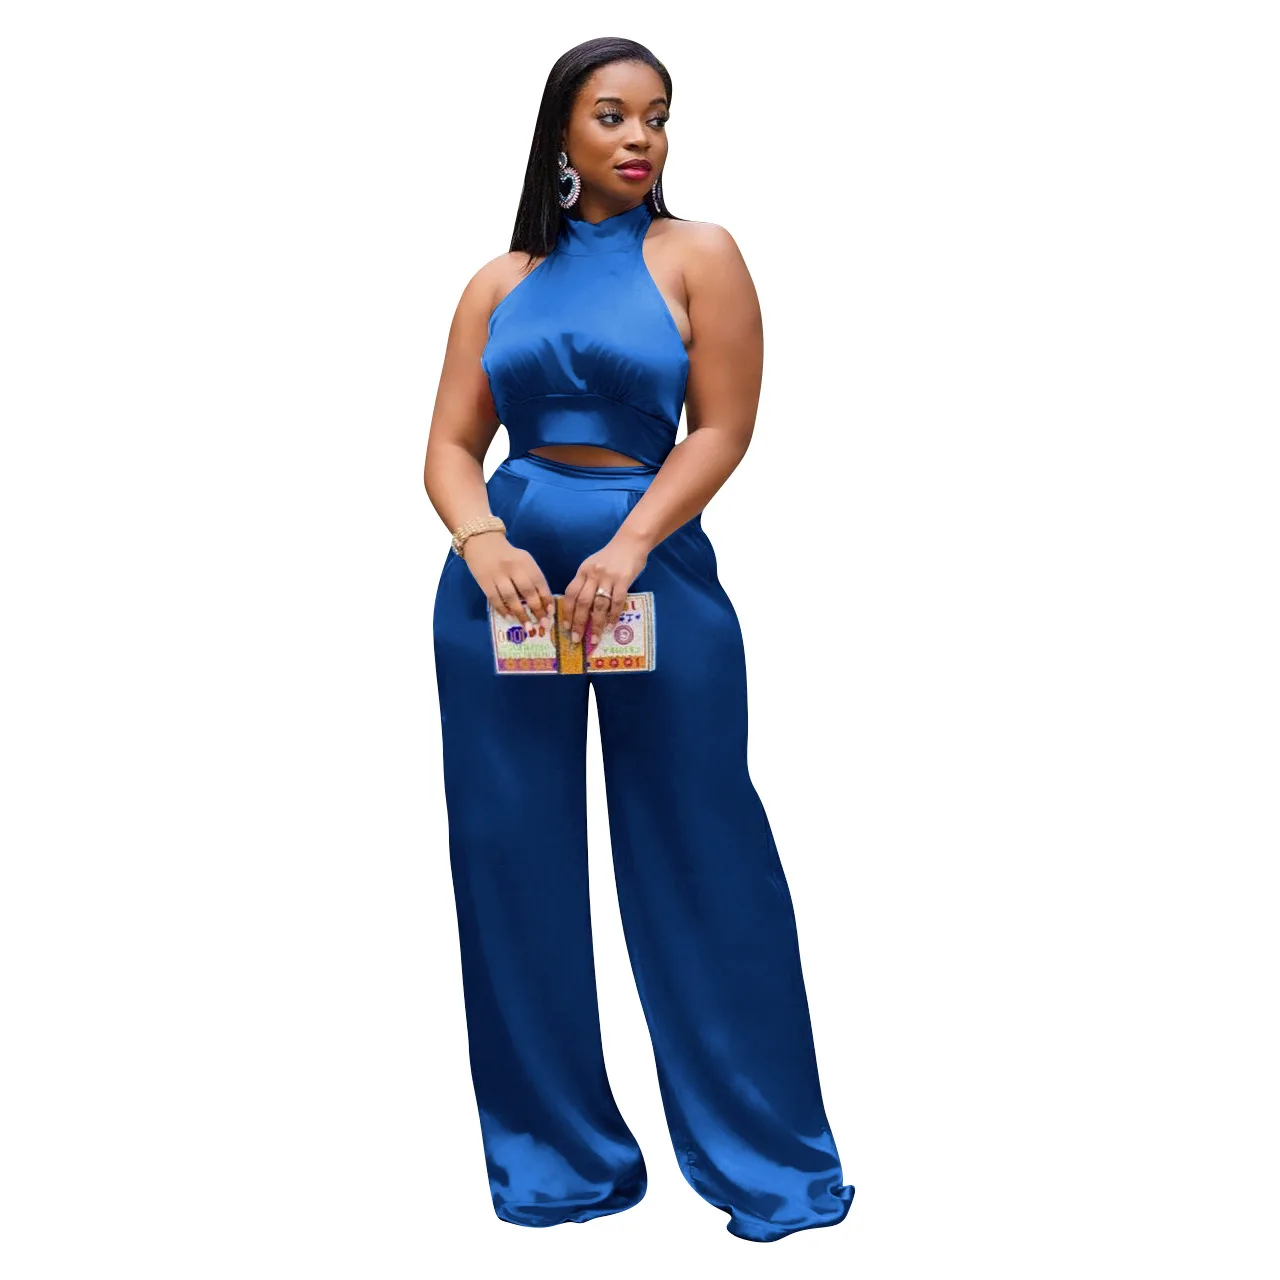 

2022 New Arrivals Fashion Women Casual Neck Drawstring Sleeveless Crop Wide Leg Pants 2 Pieces Set Solid Satin Jumpsuit, Picture show